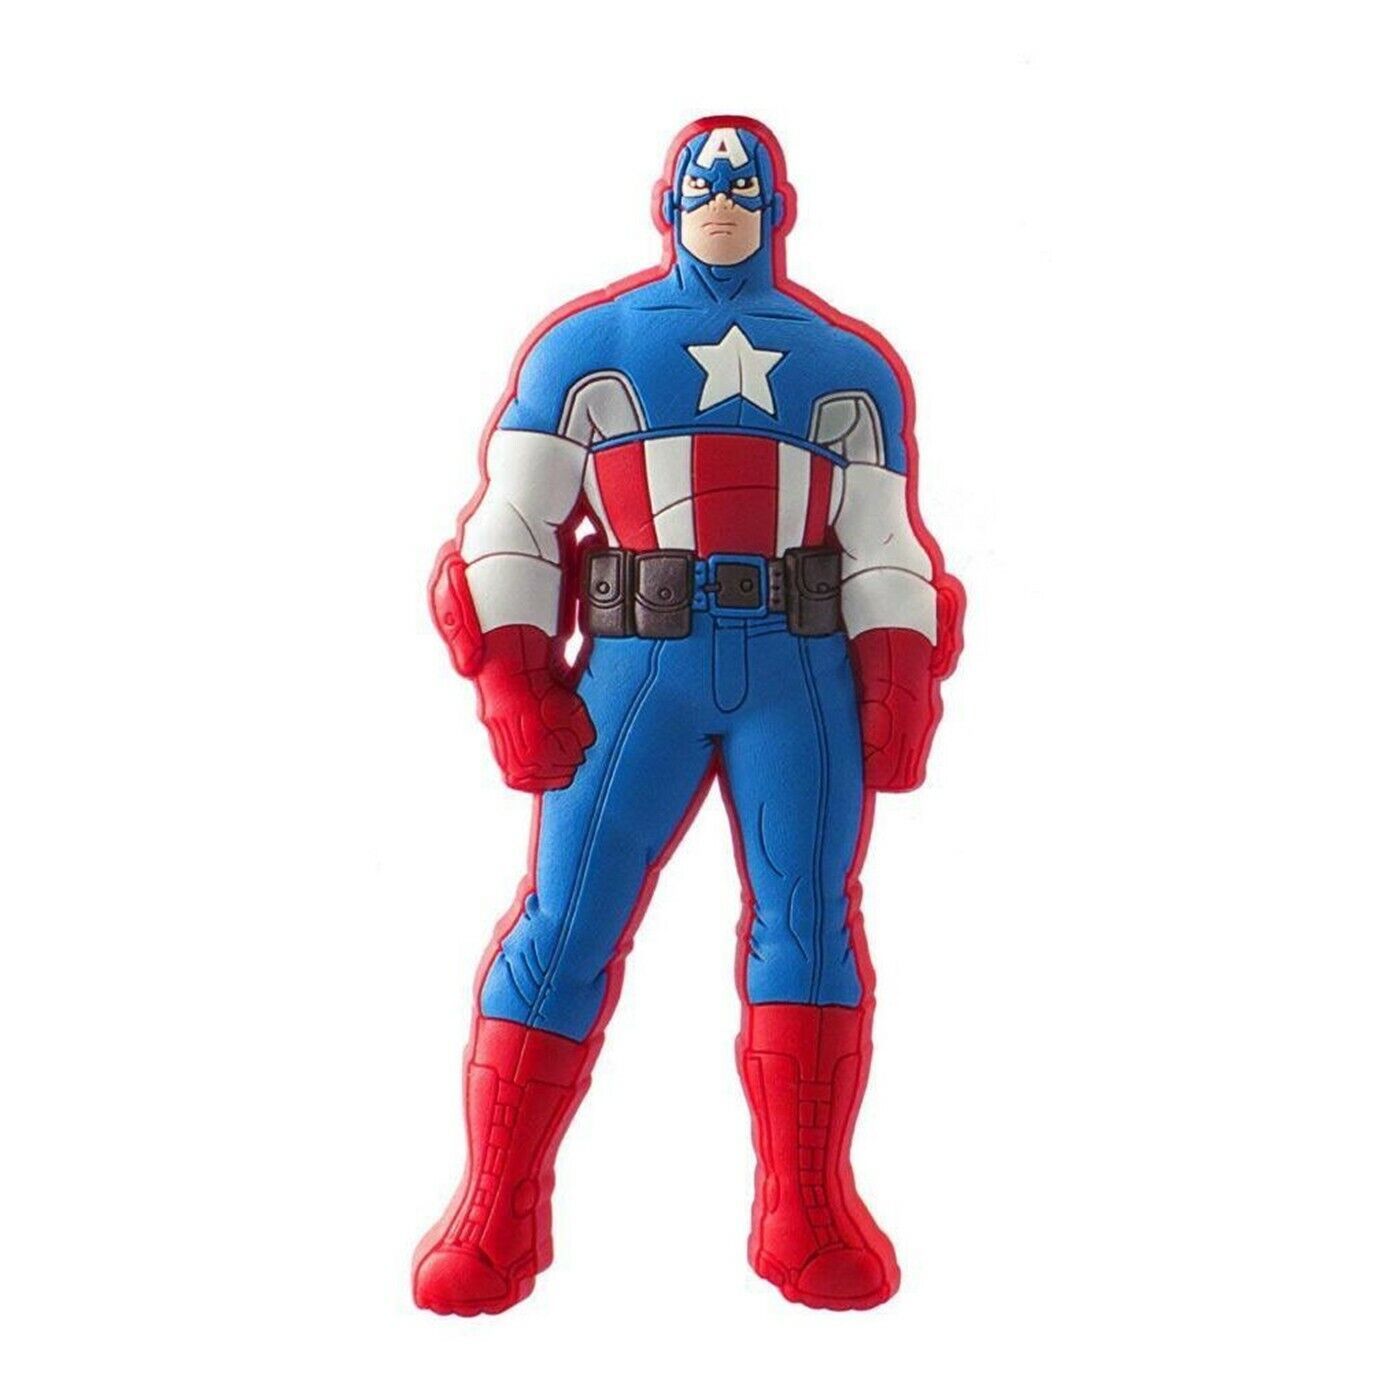 Captain America Character Magnet Blue - $10.98